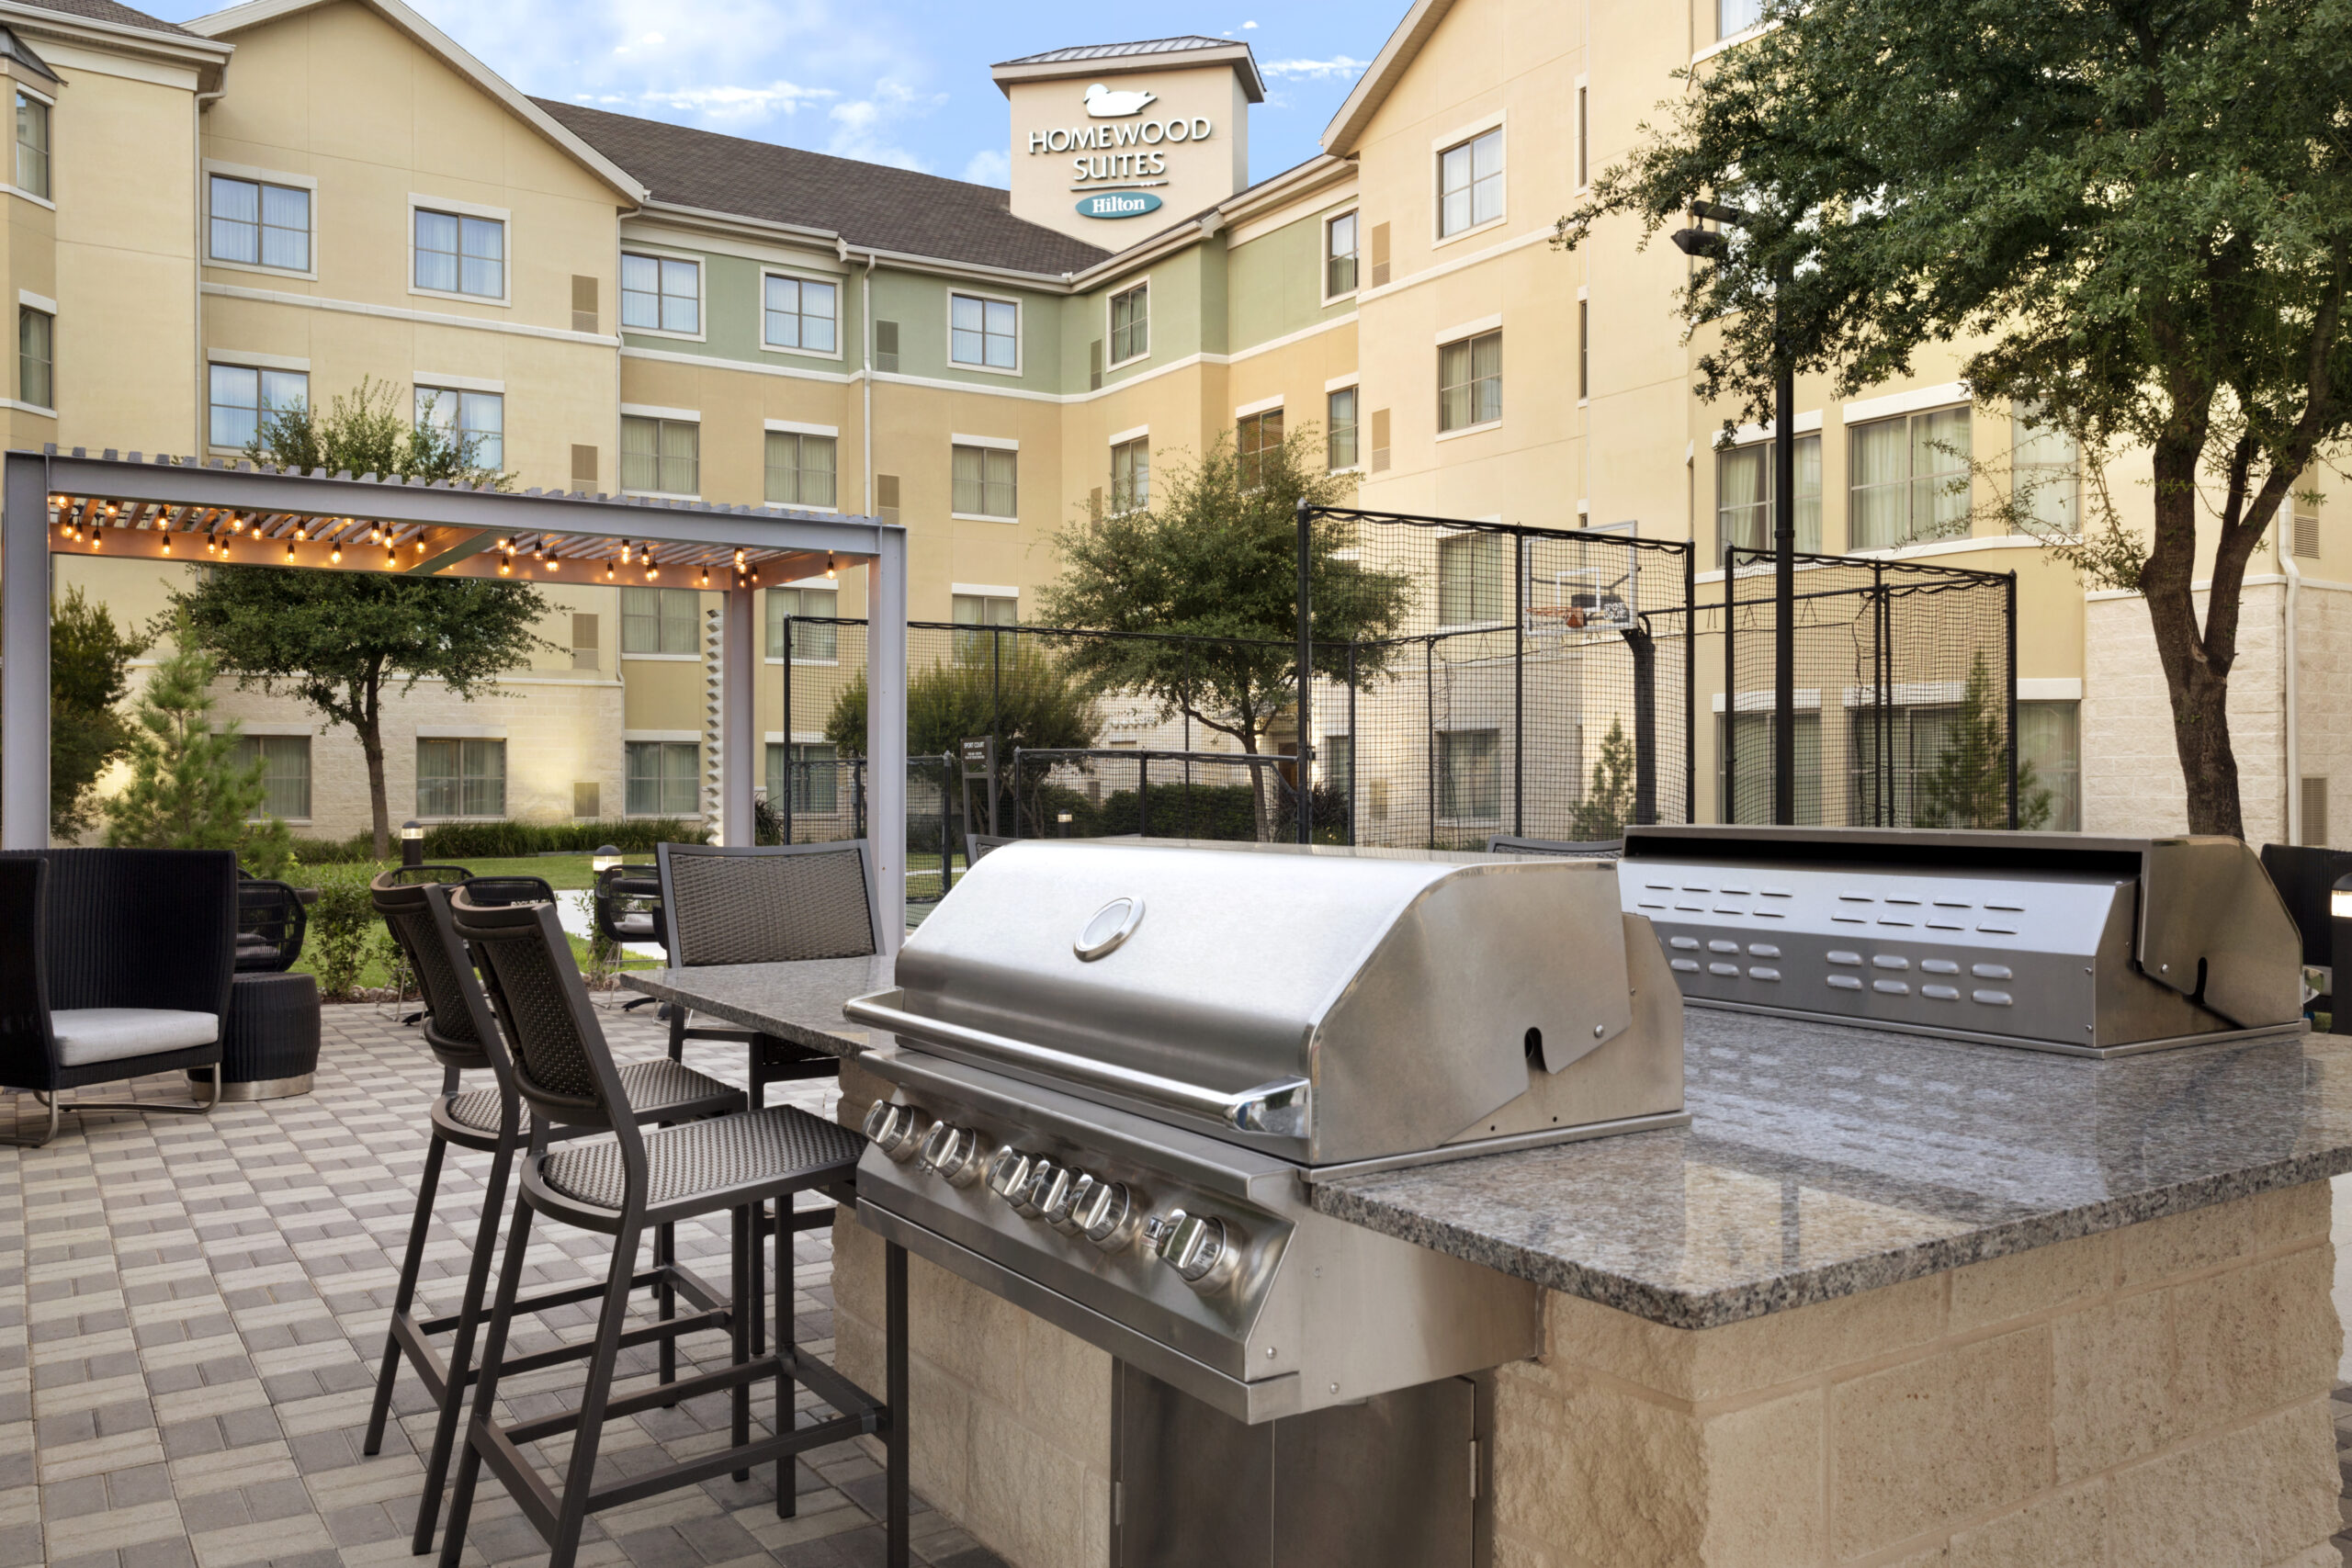 Homewood Suites Plano/Richardson building and grill in courtyard